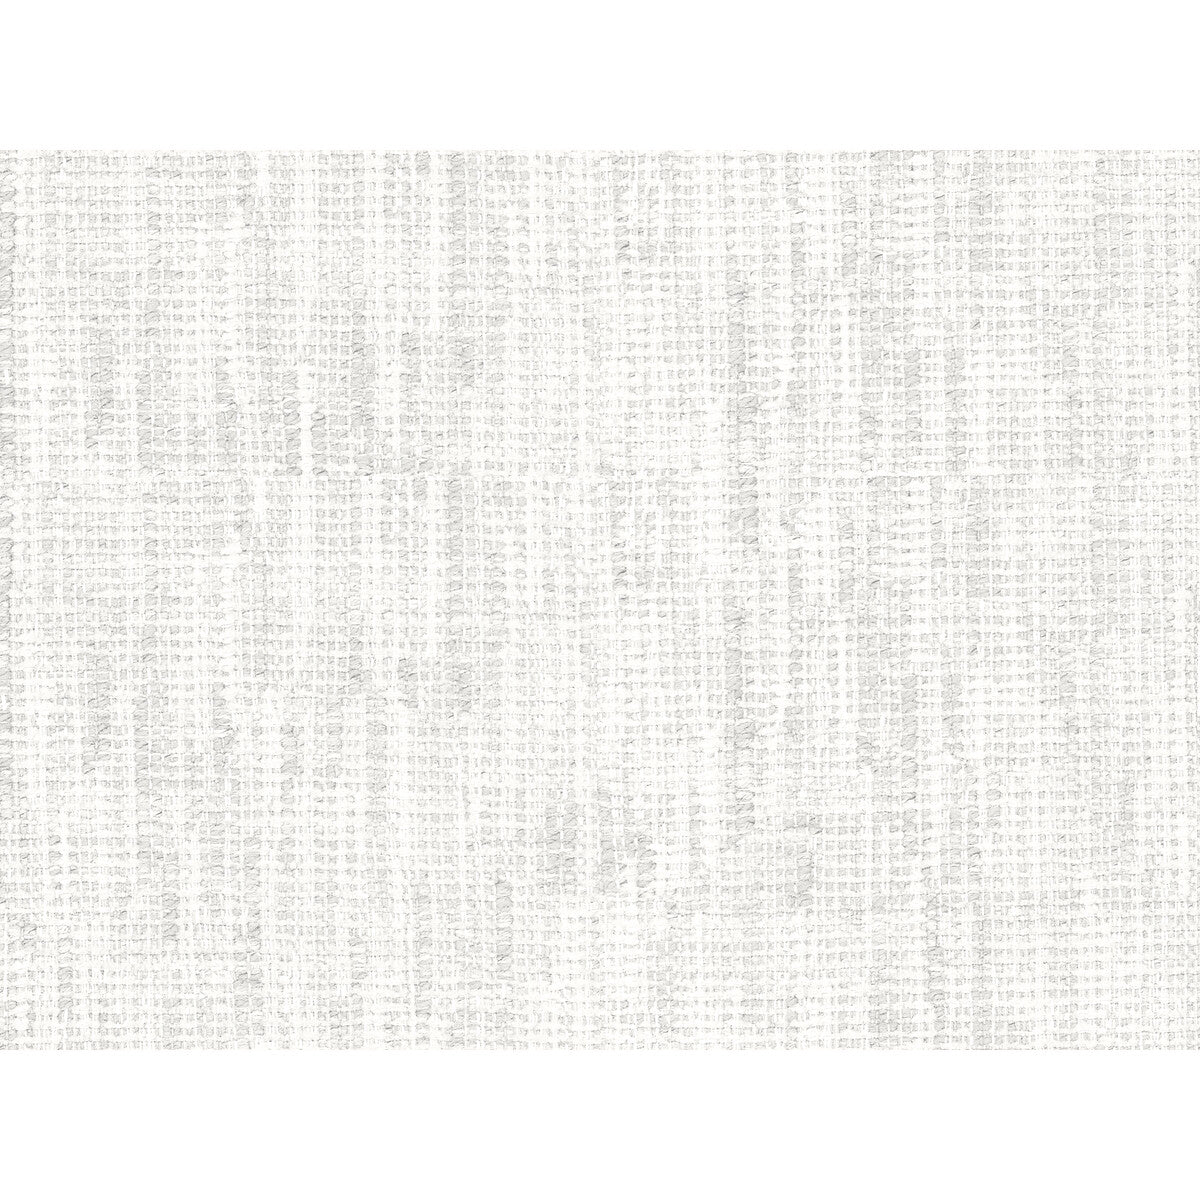 Walney fabric in ivory color - pattern 2016126.101.0 - by Lee Jofa in the Furness Weaves collection